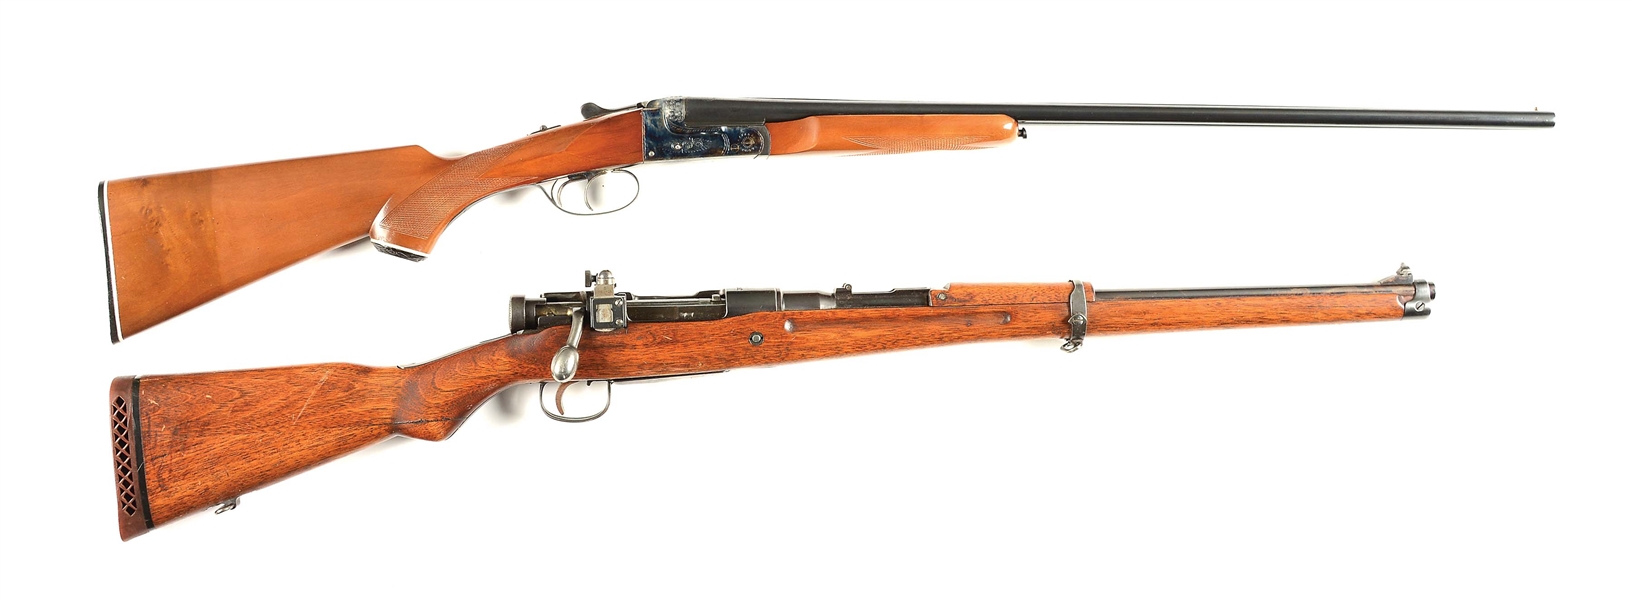 (M+C) LOT OF TWO: URKO FIREARMS SIDE BY SIDE .410 BORE SHOTGUN AND SPORTERIZED KOKURA TYPE 99 BOLT ACTION RIFLE.